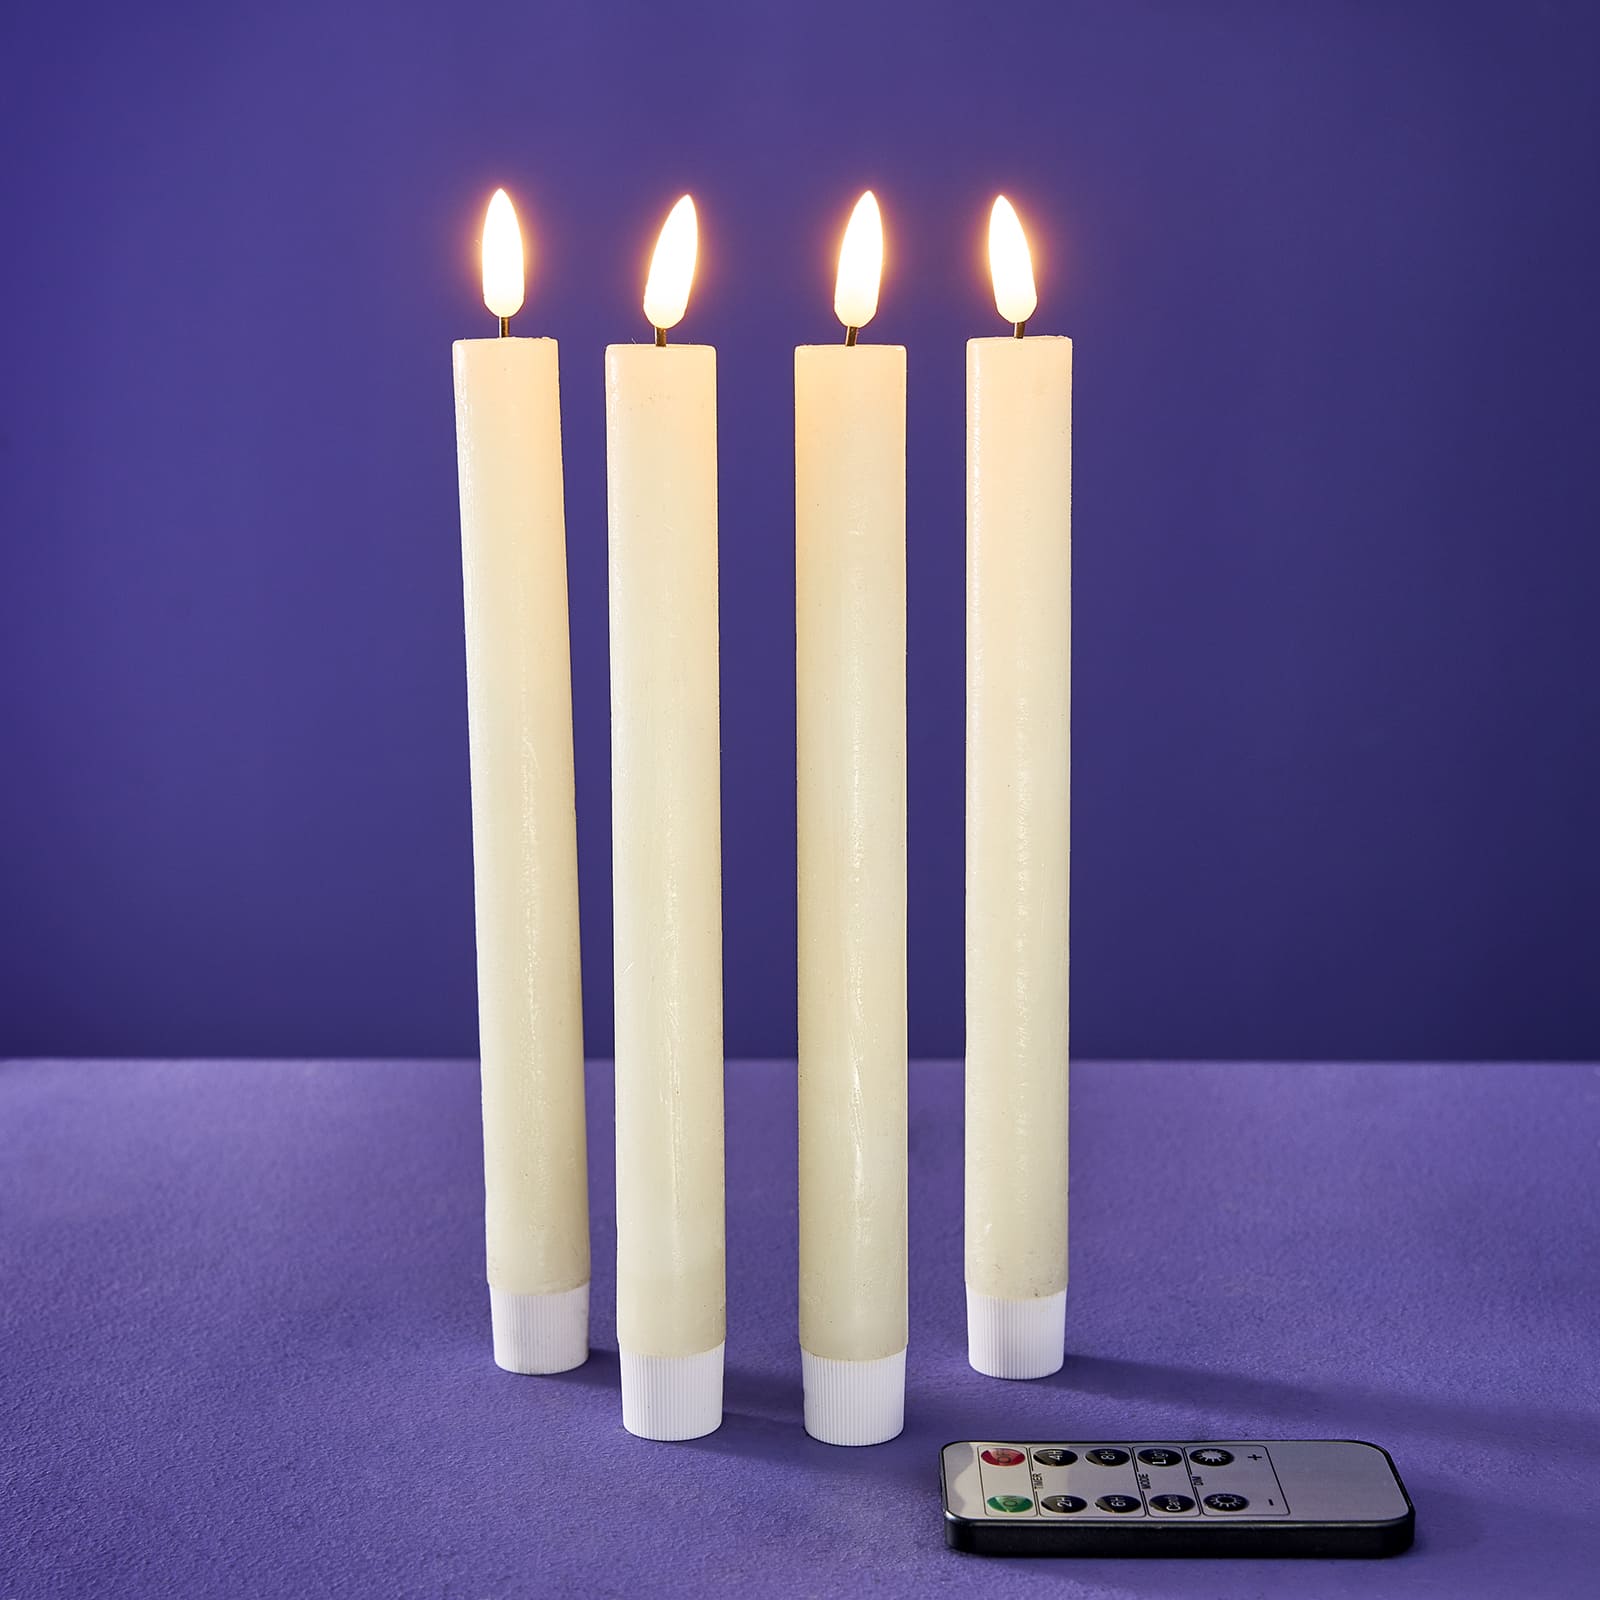 LED unusual | Quirky online & WERNS candles